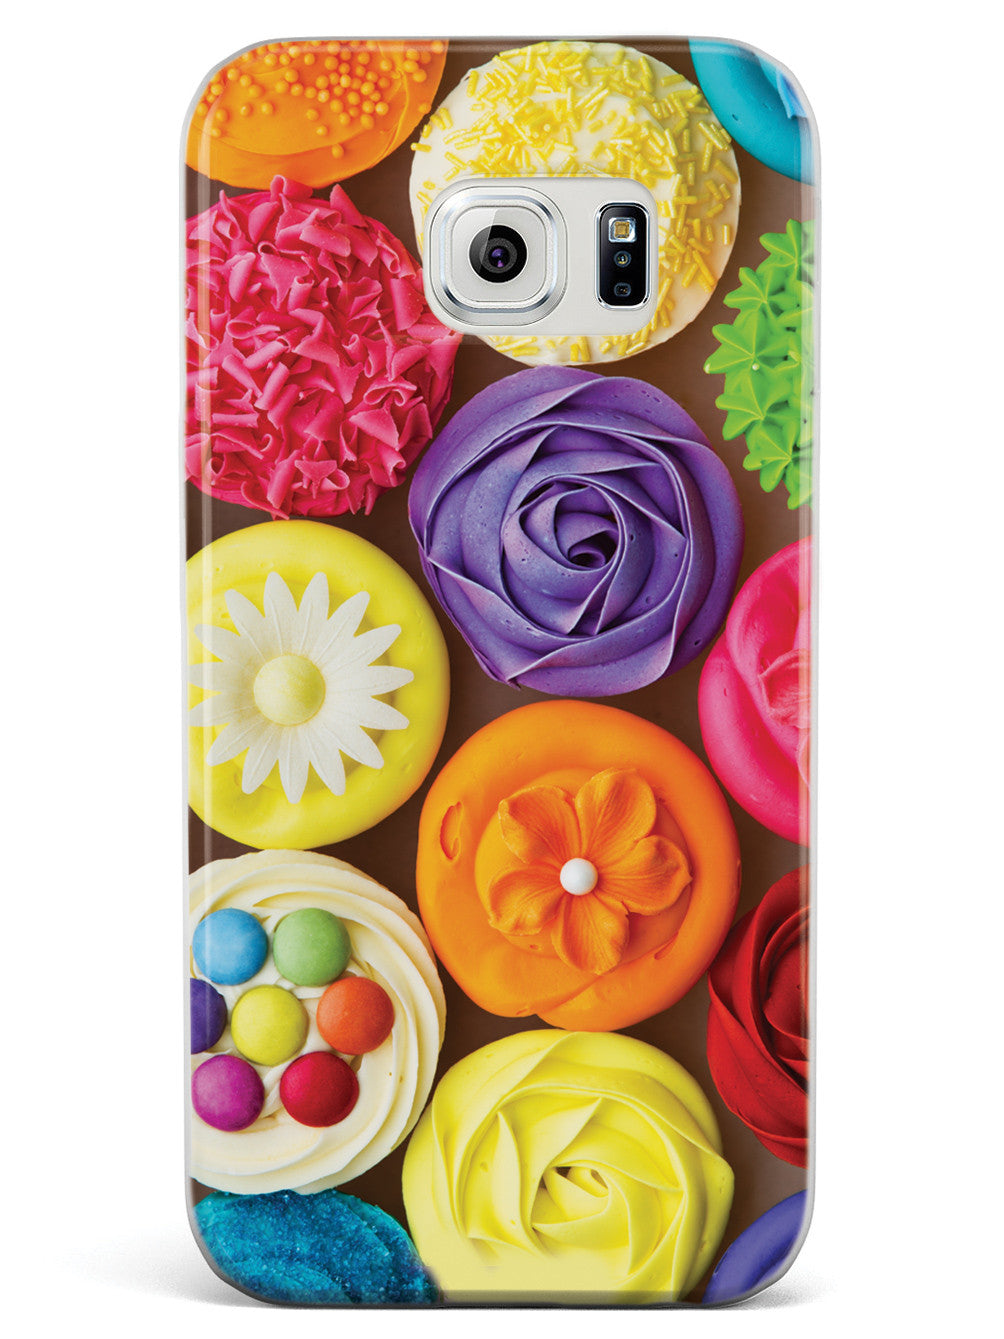 Cupcakes Galore! Sweet's Lover Case